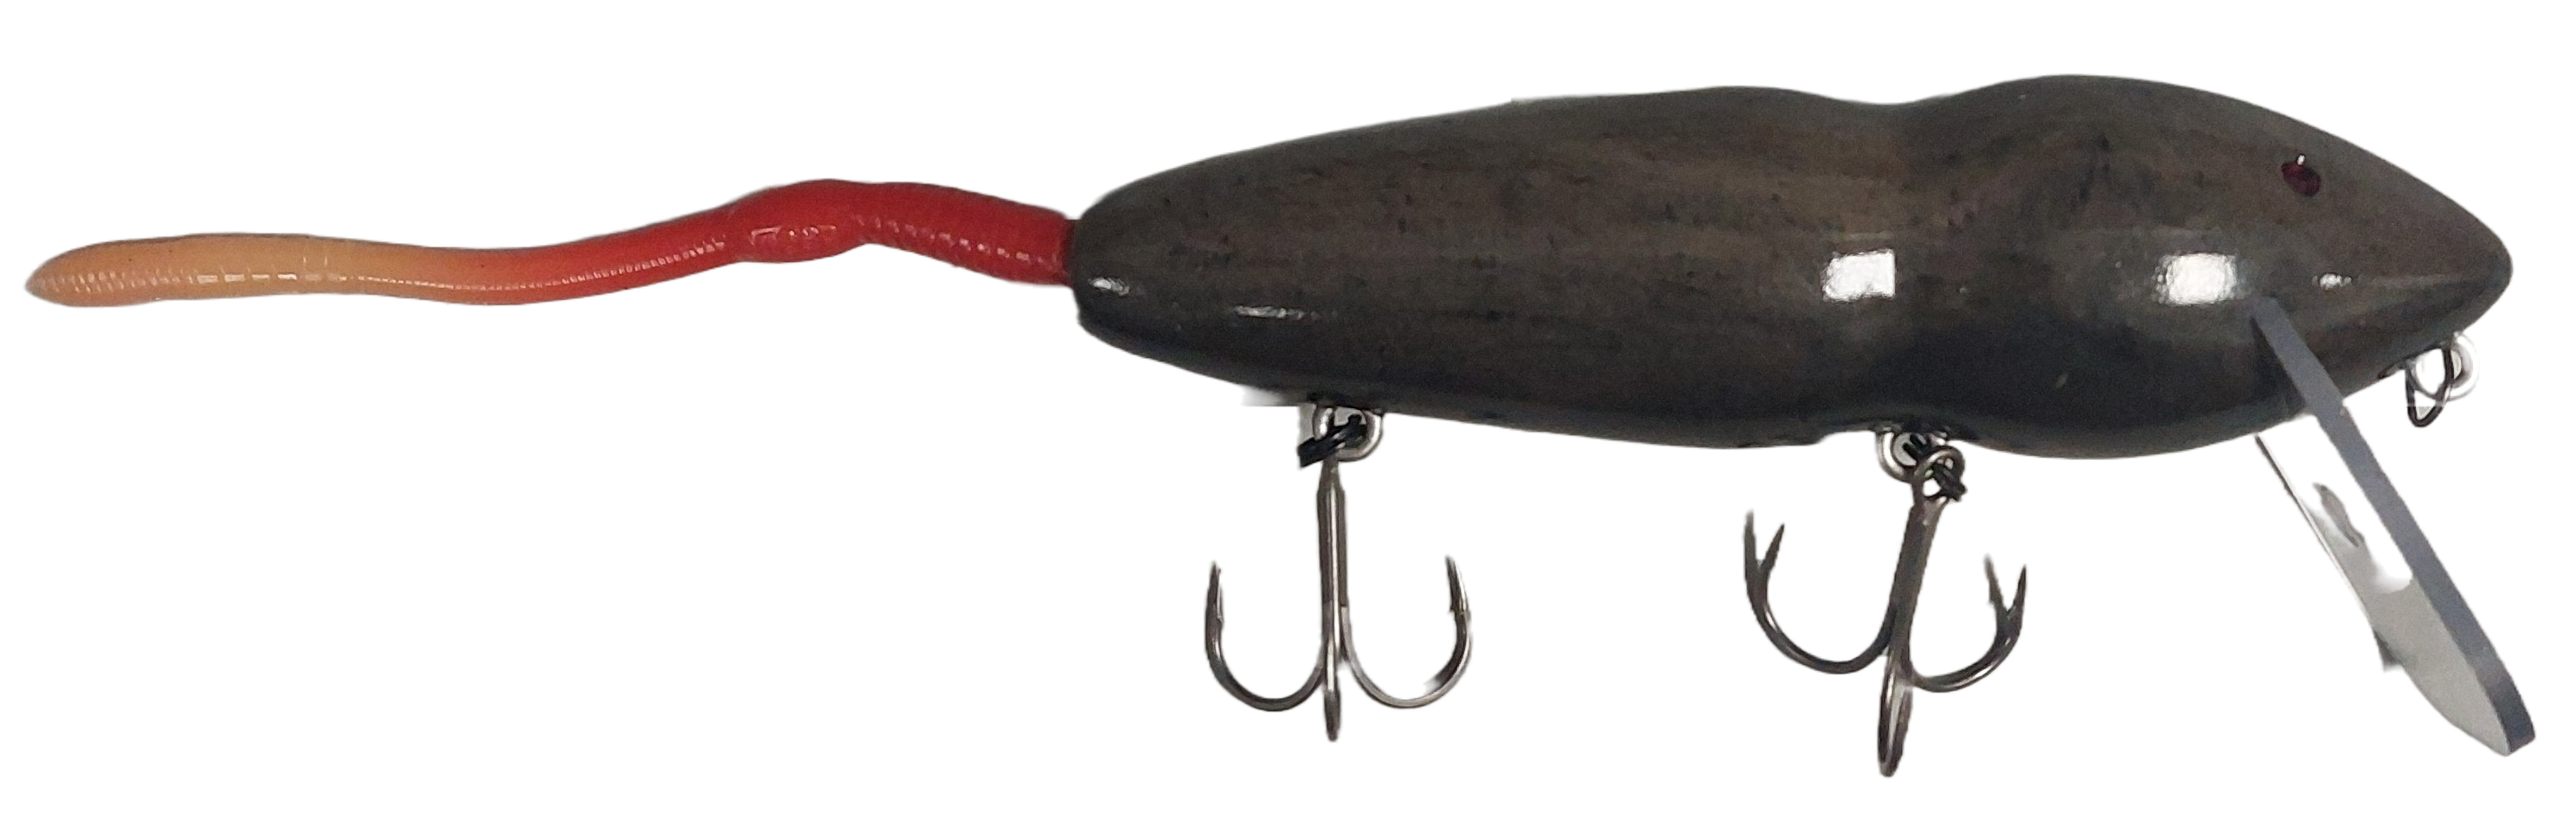 Rats  Copperstate Tackle